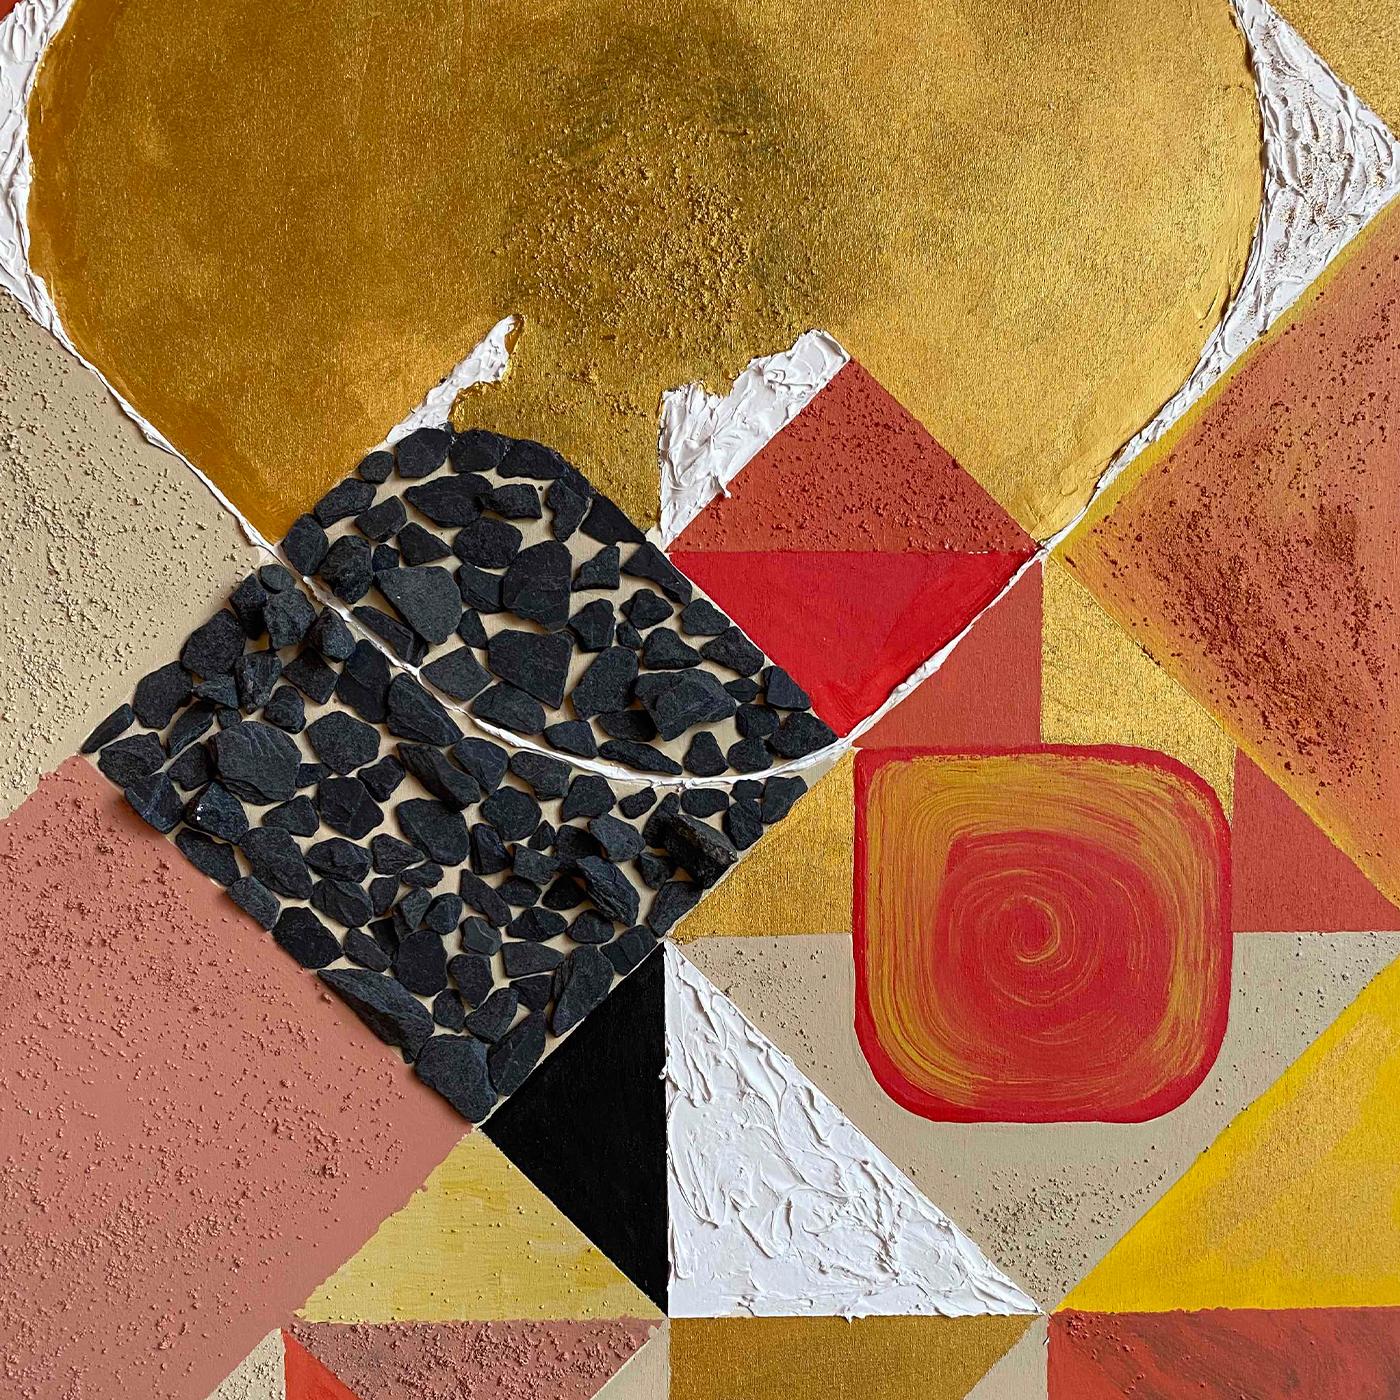 This avant-garde wooden, wall panel is a non-reproducible, one-off piece from the Geometrie series by Mascia Meccani. Featuring an alluring combination of overlapping geometric shapes in warm and earthy hues, such as gold, red, terracotta, and